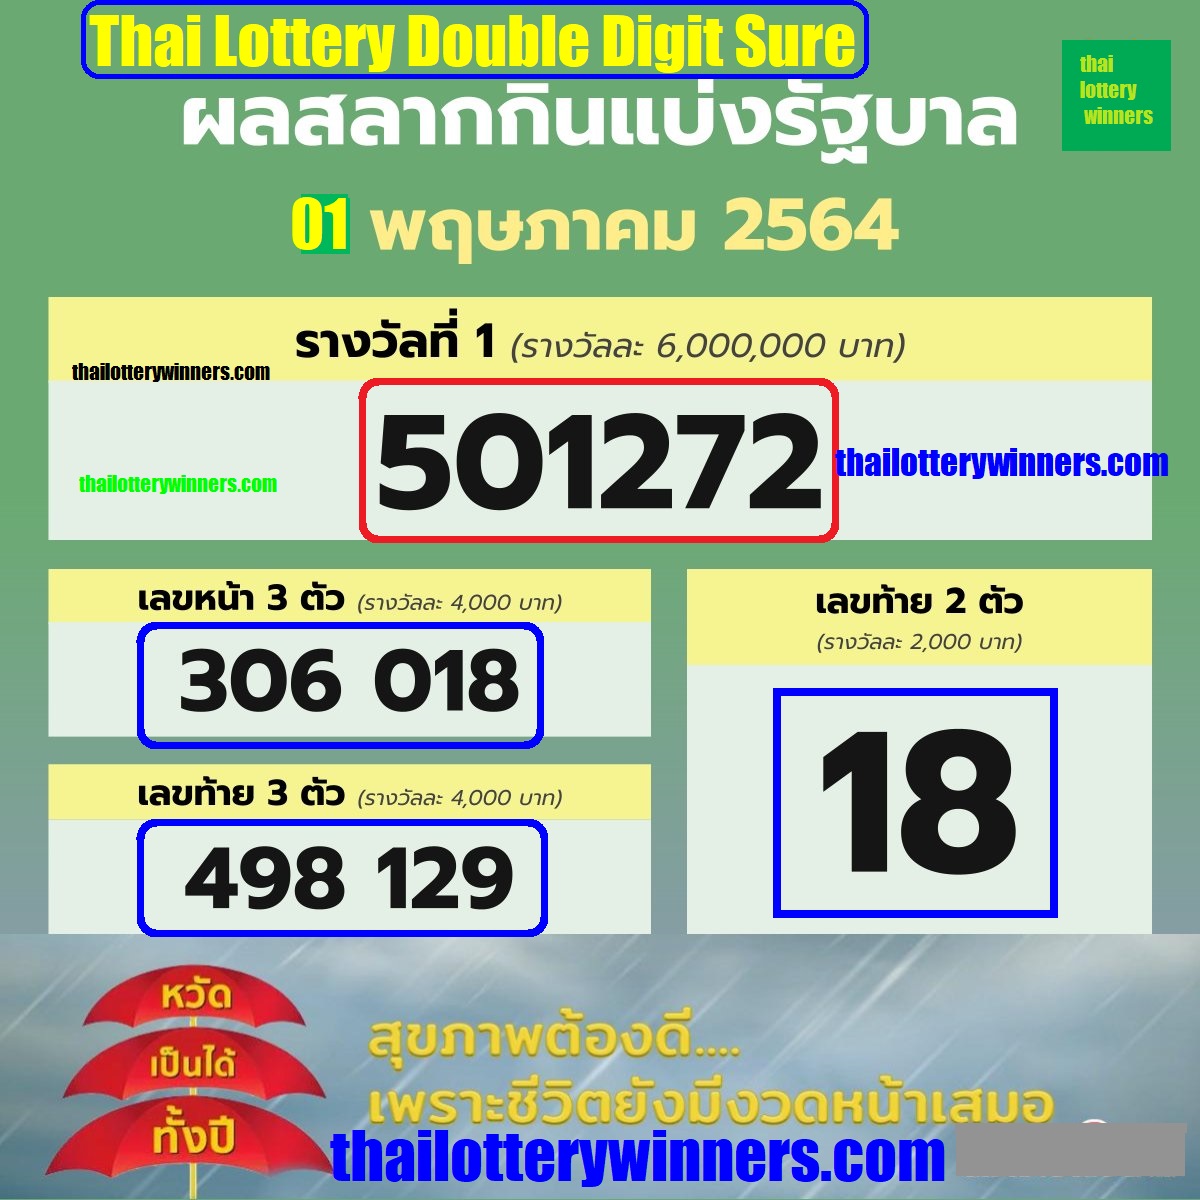 Thai Lottery Double digit